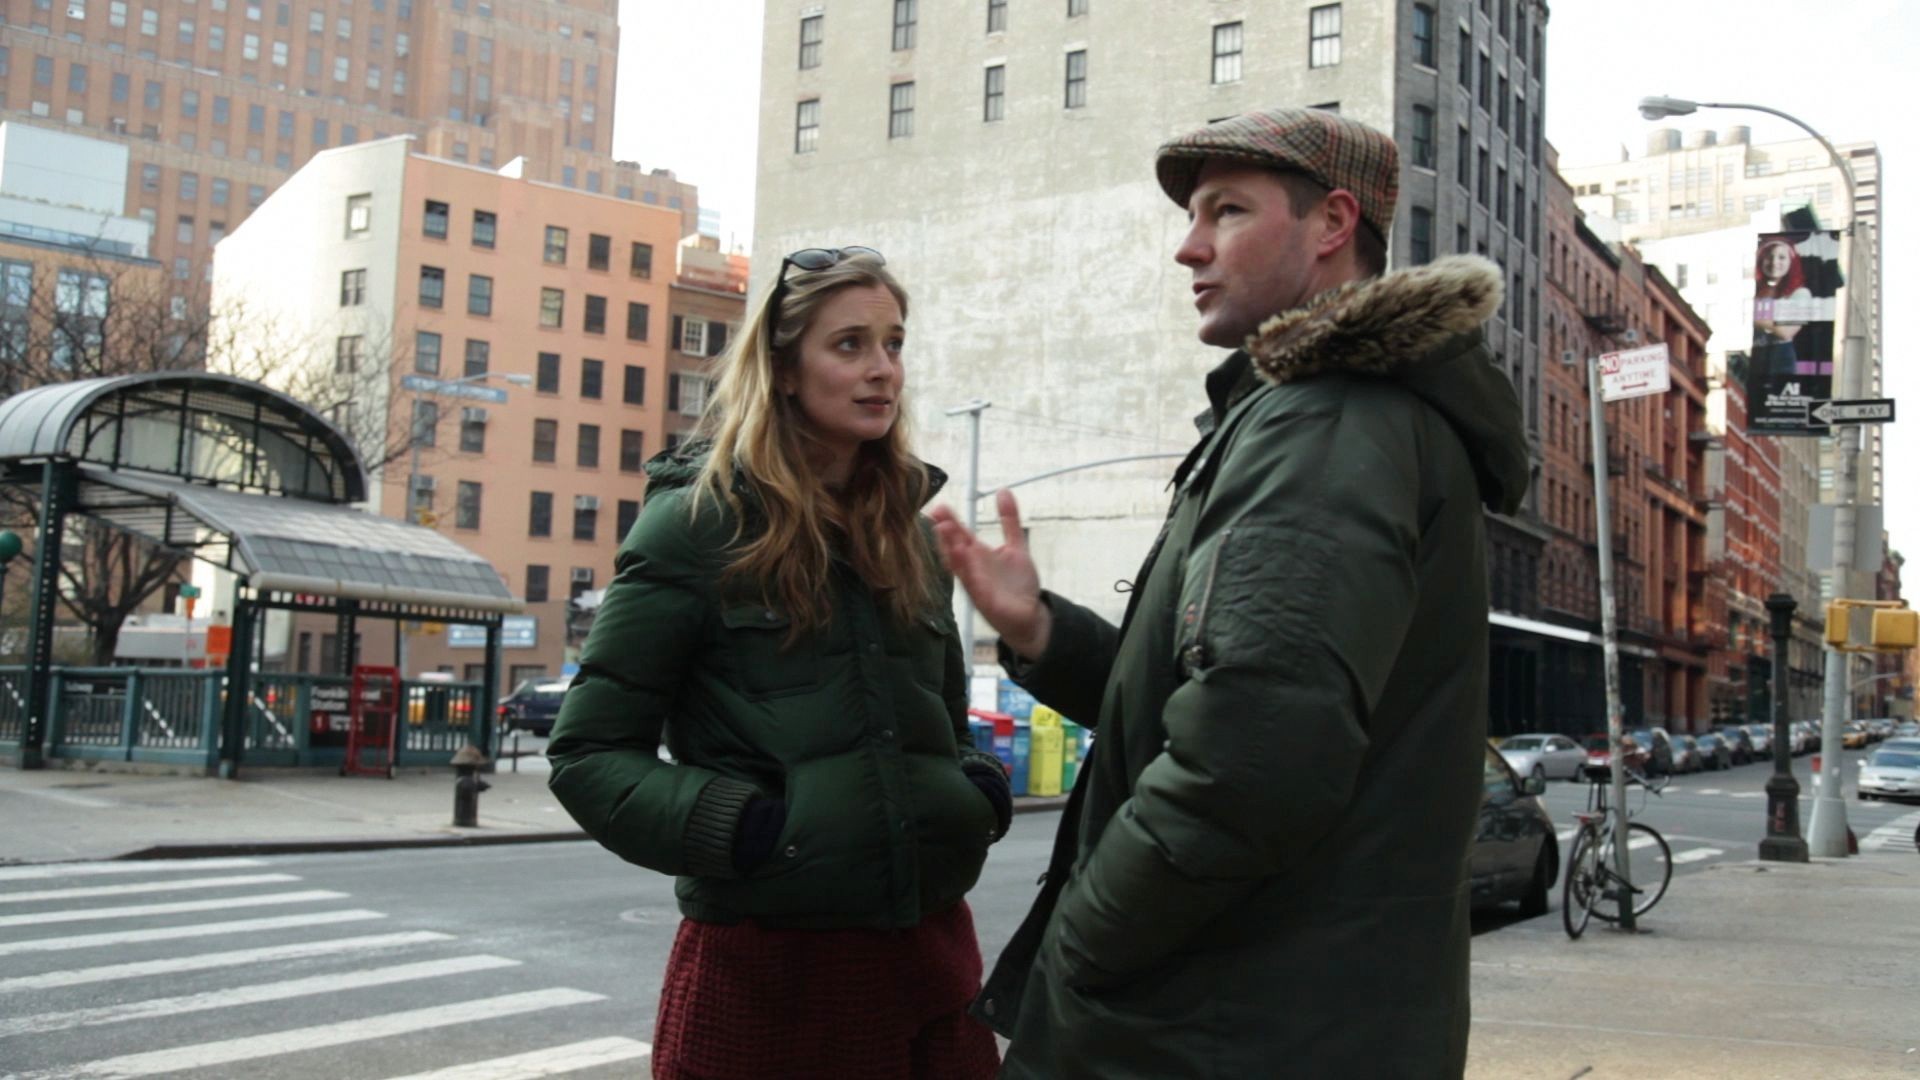 Caitlin Fitzgerald stars as Katie and Edward Burns stars as Buzzy in Tribeca Film's Newlyweds (2012). Photo credit by William Rexer.